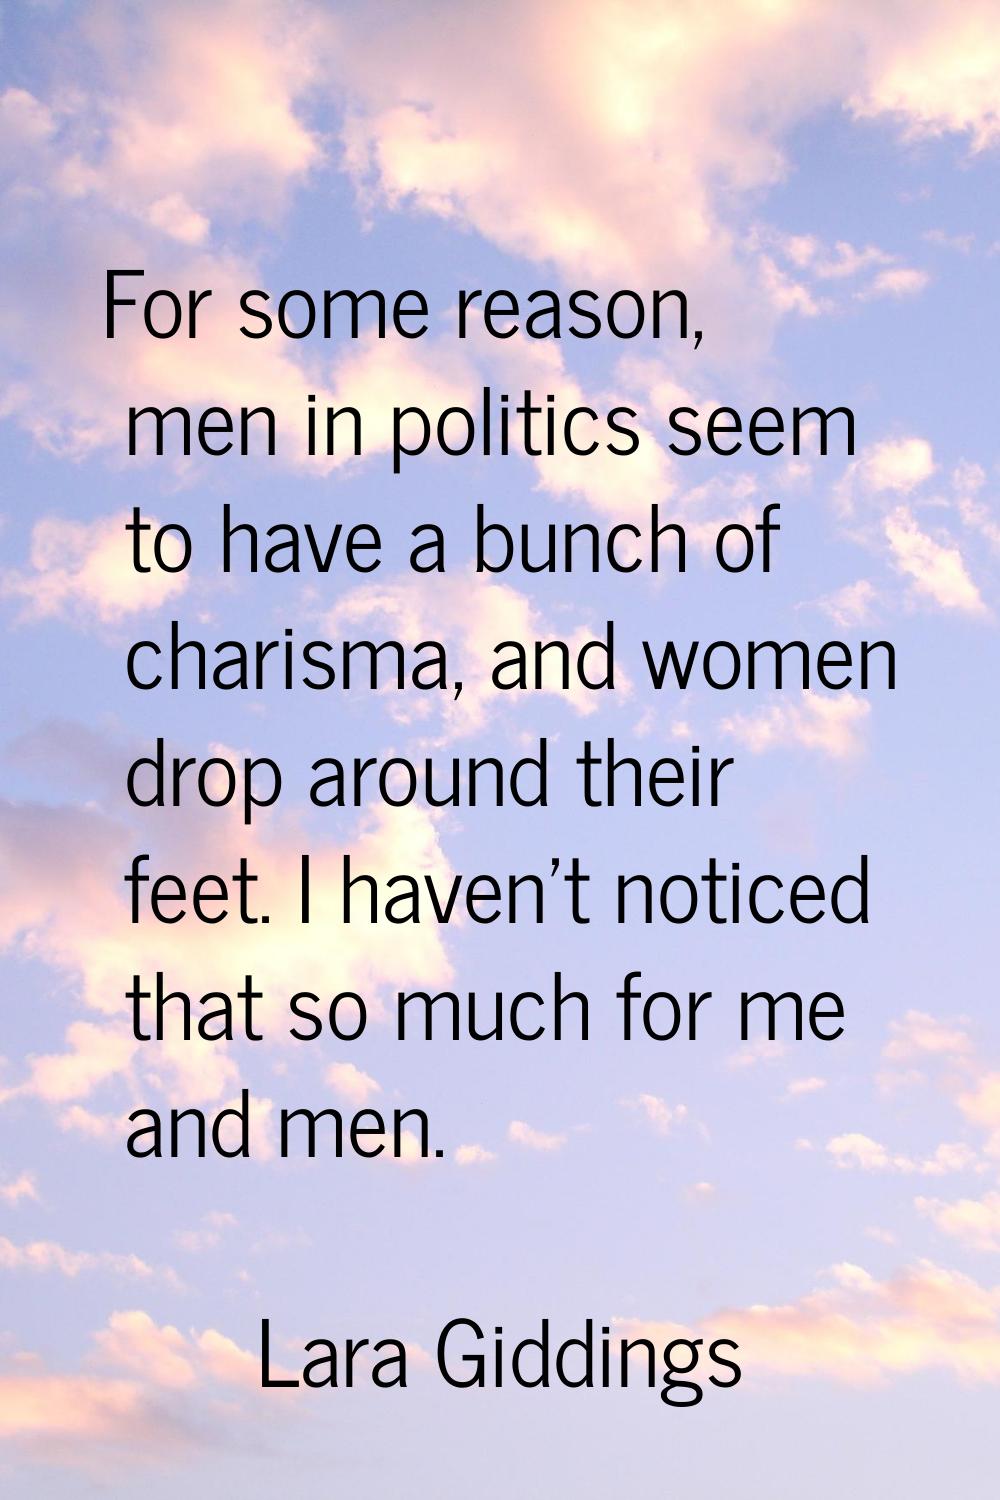 For some reason, men in politics seem to have a bunch of charisma, and women drop around their feet